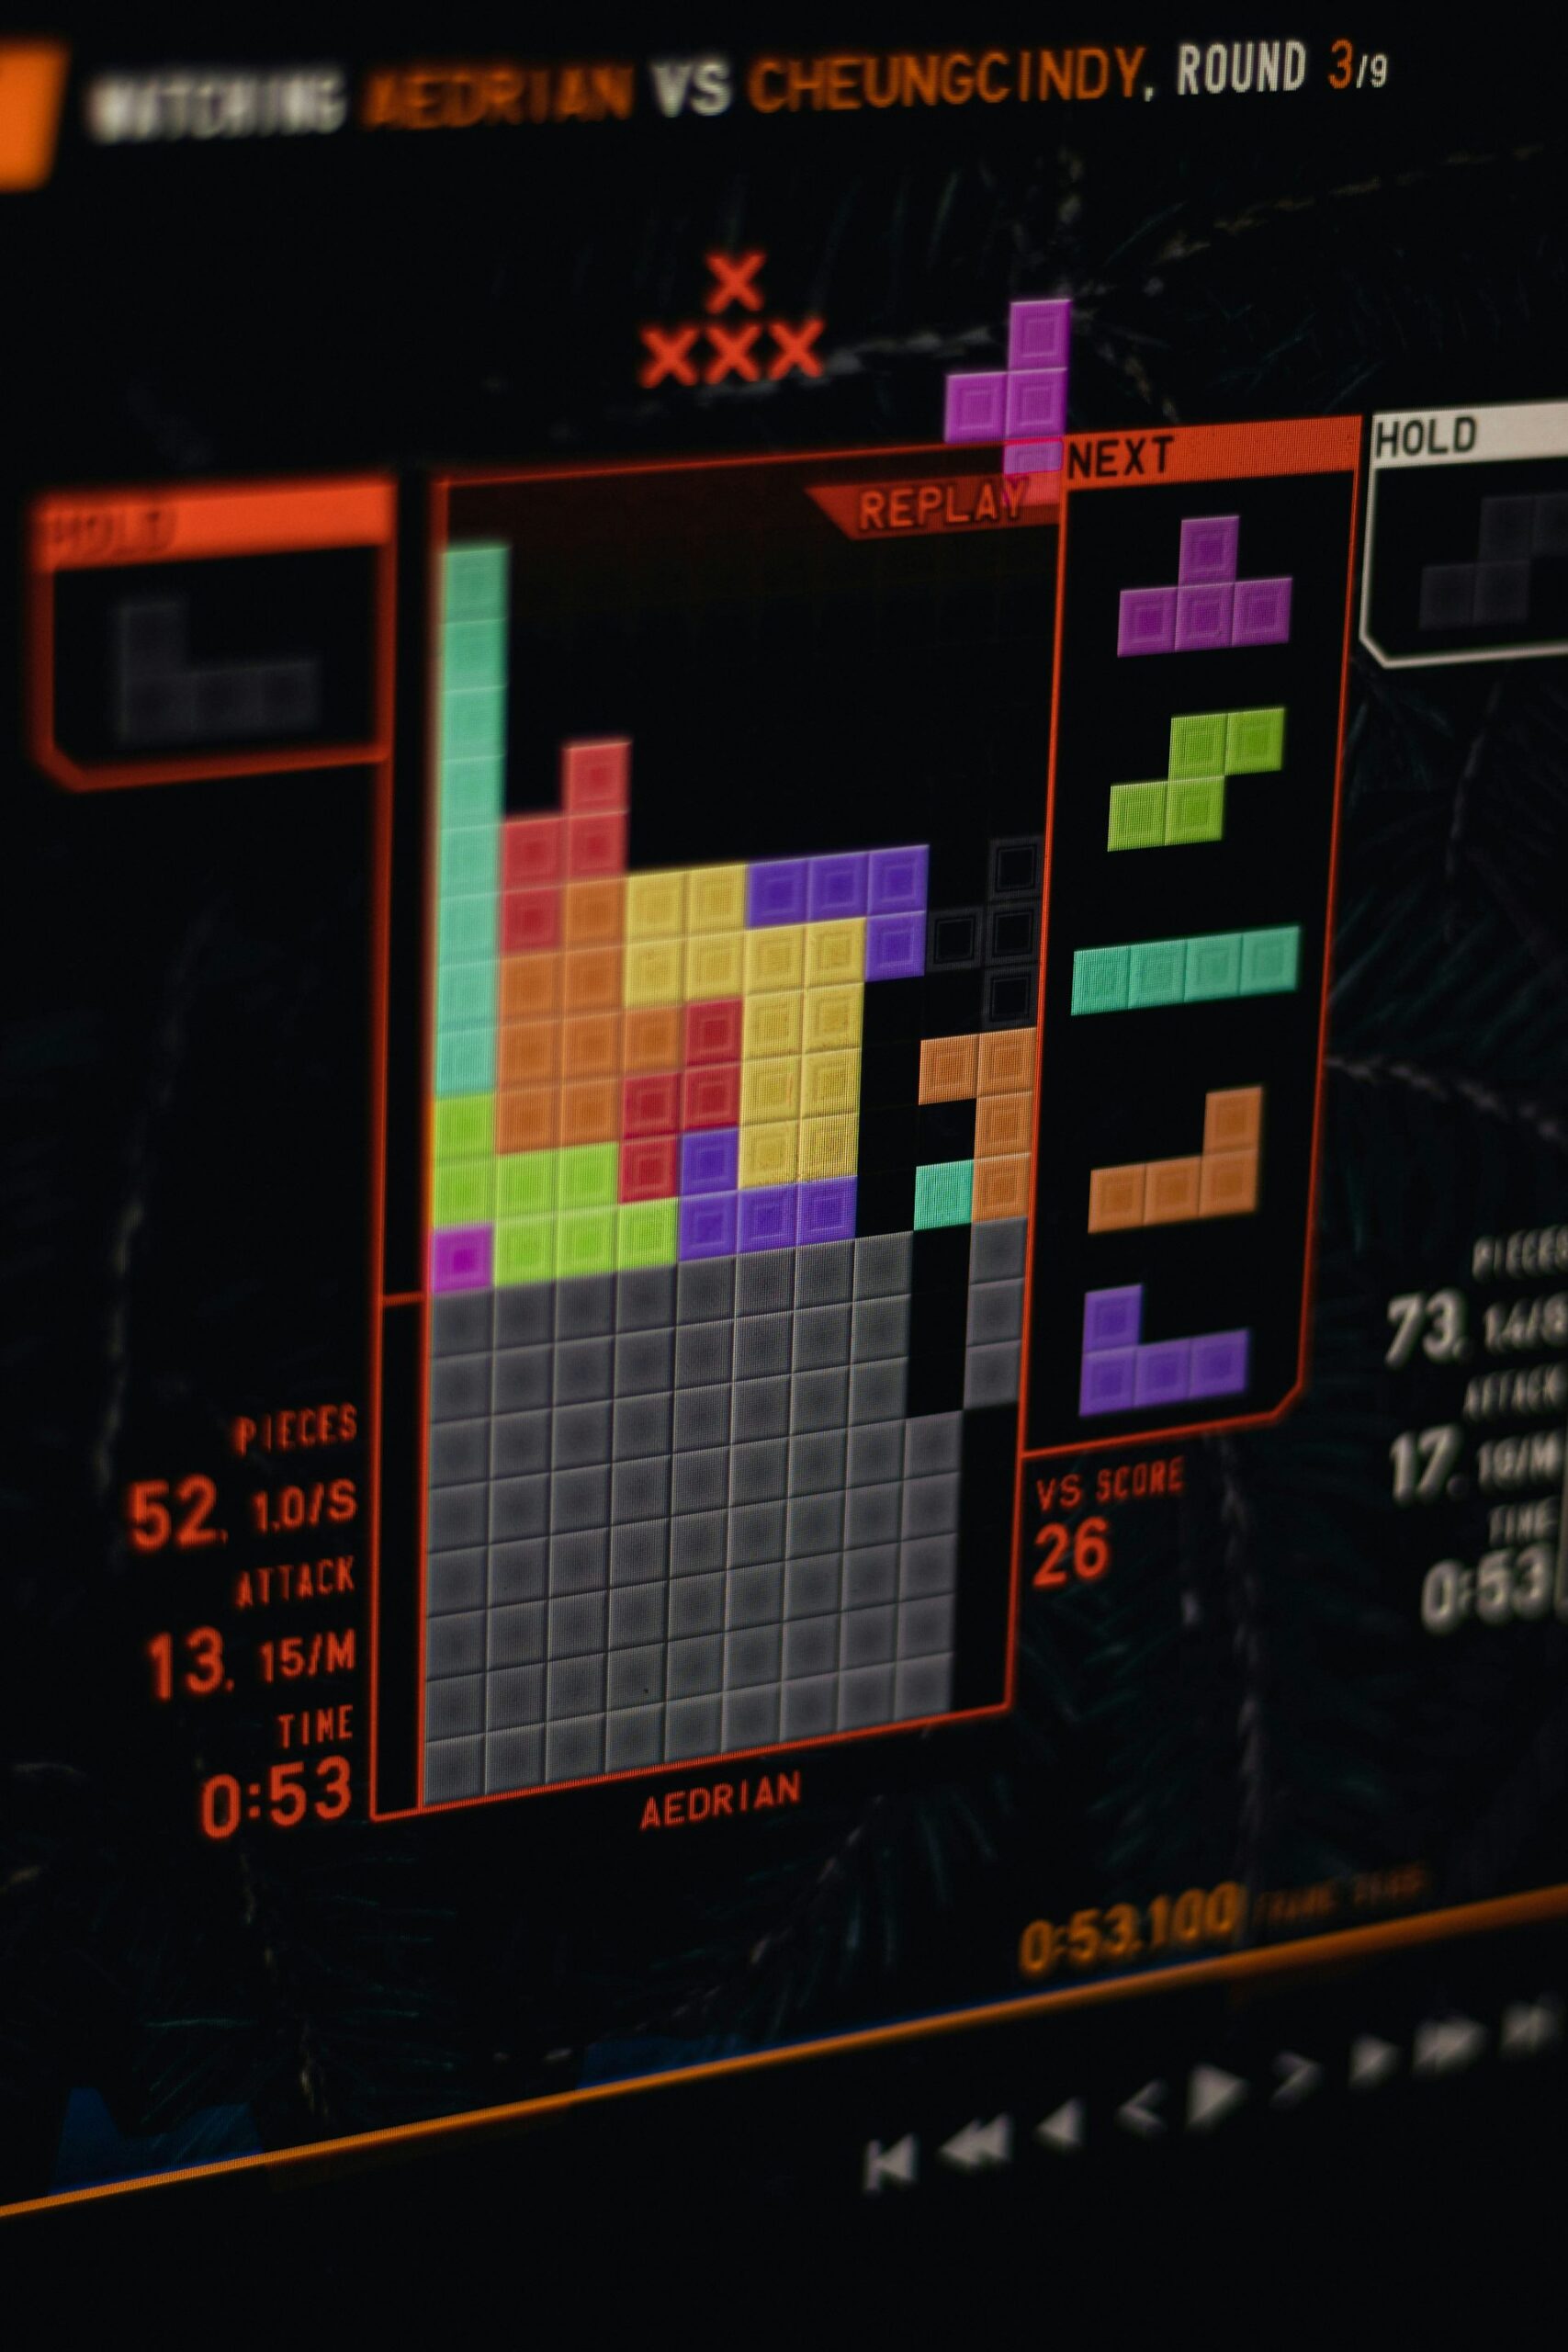 Does playing Tetris have the potential to prevent PTSD after experiencing a traumatic event?